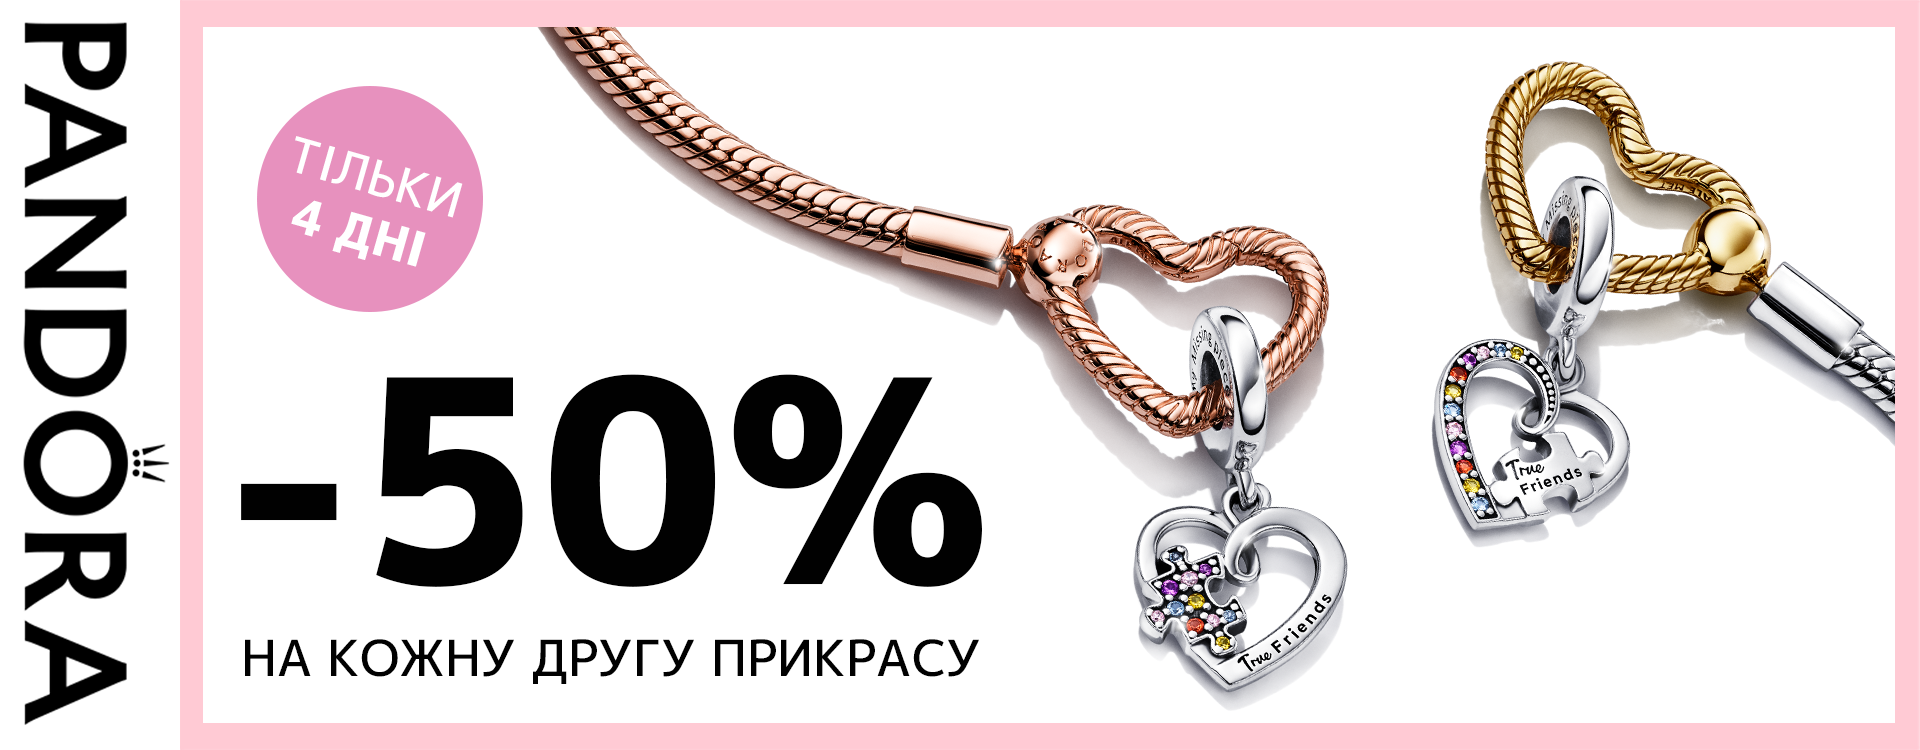 In Pandora -50% on every second piece of jewelry